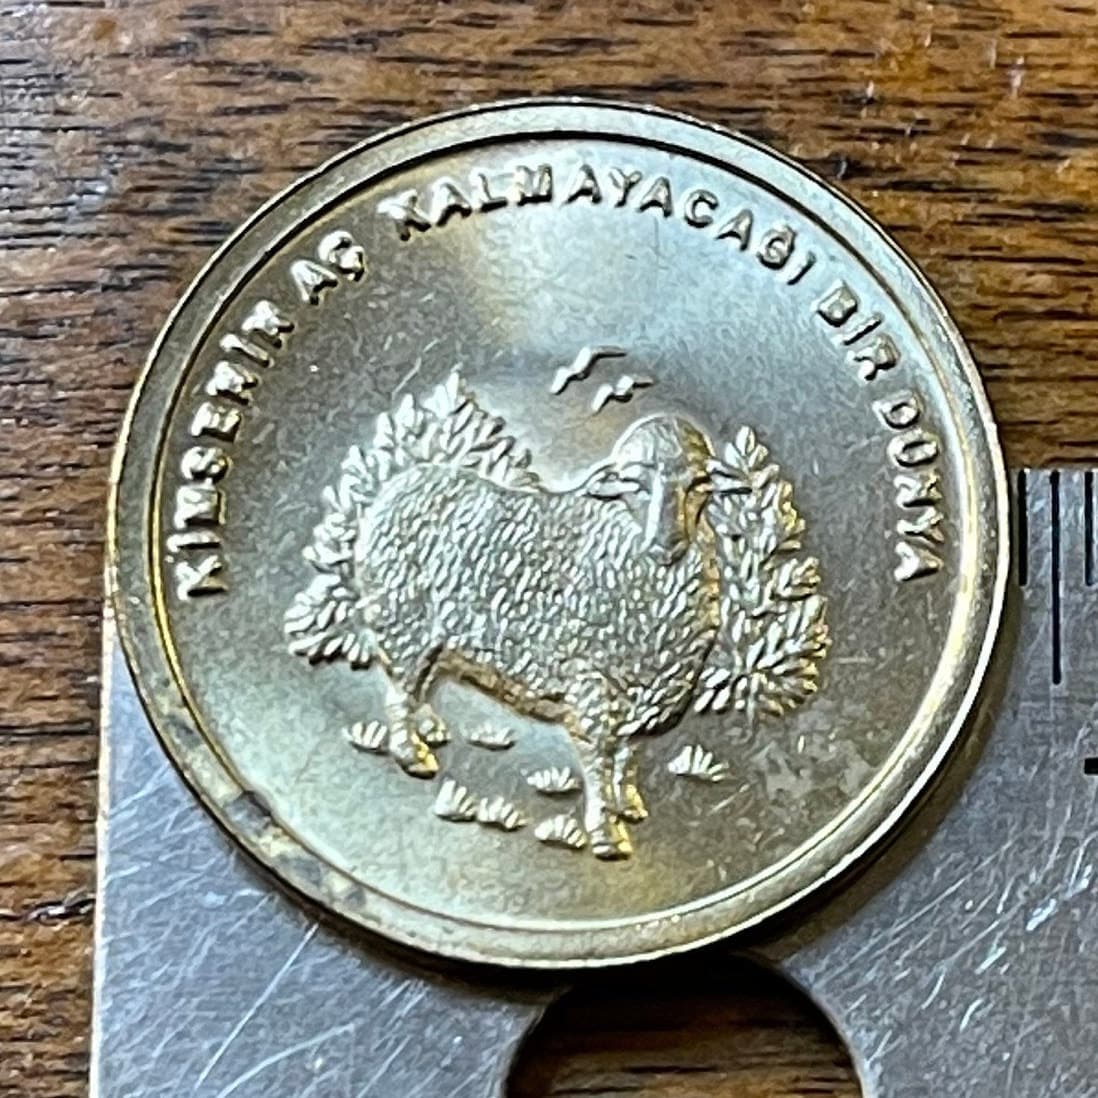 Sheep 500,000 Lira Turkey Authentic Coin Money for Jewelry and Craft Making